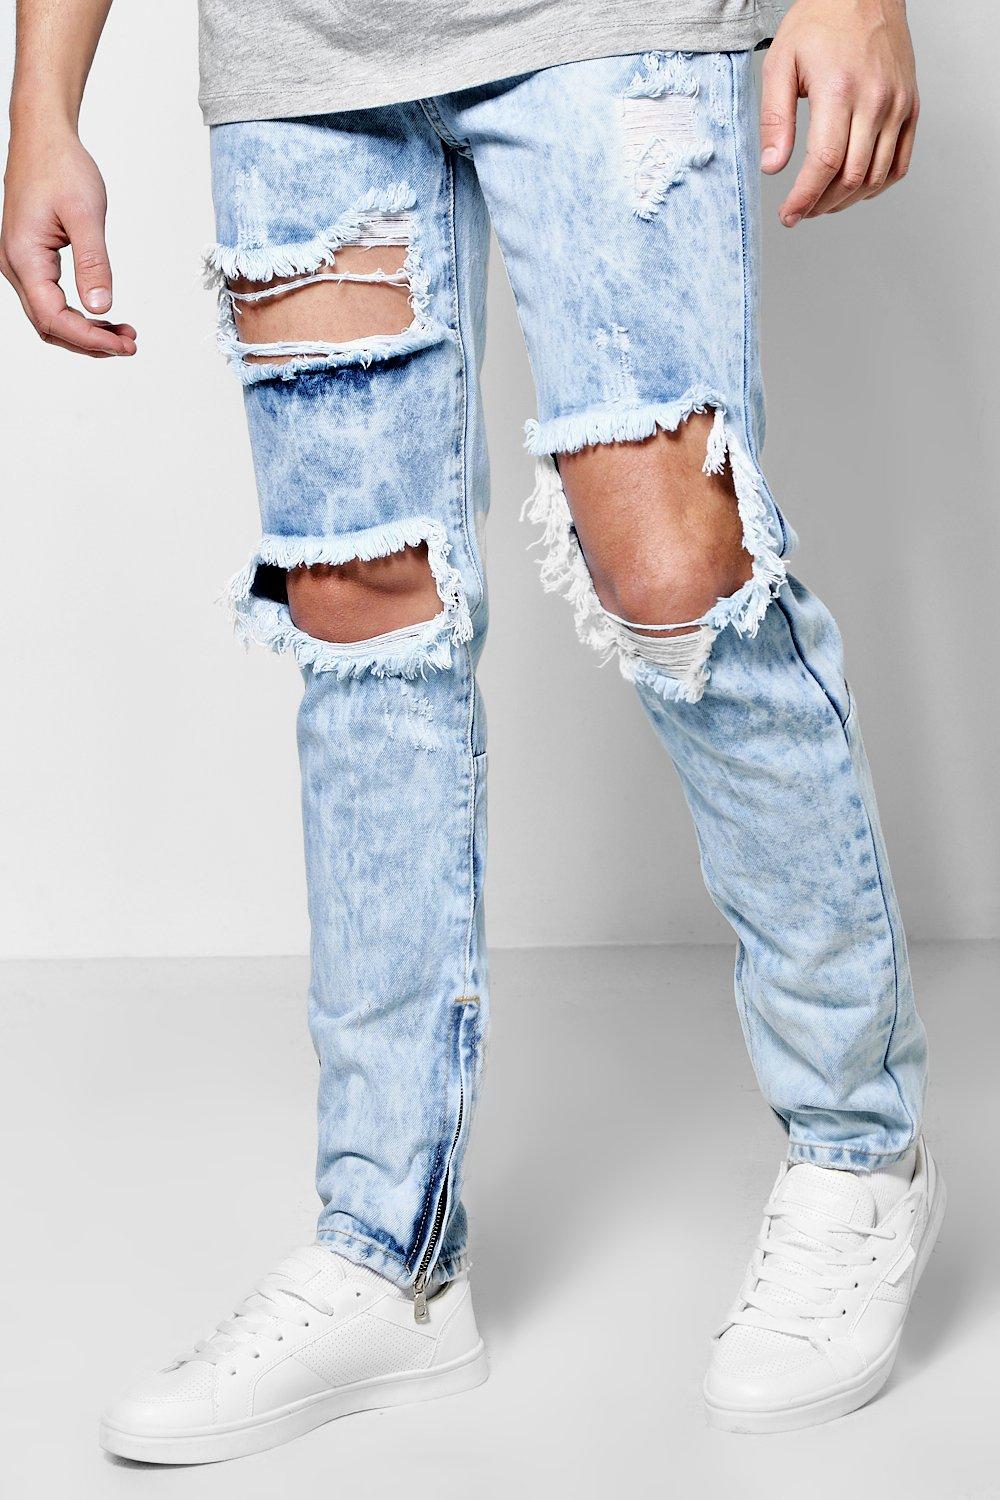 ripped jeans ireland